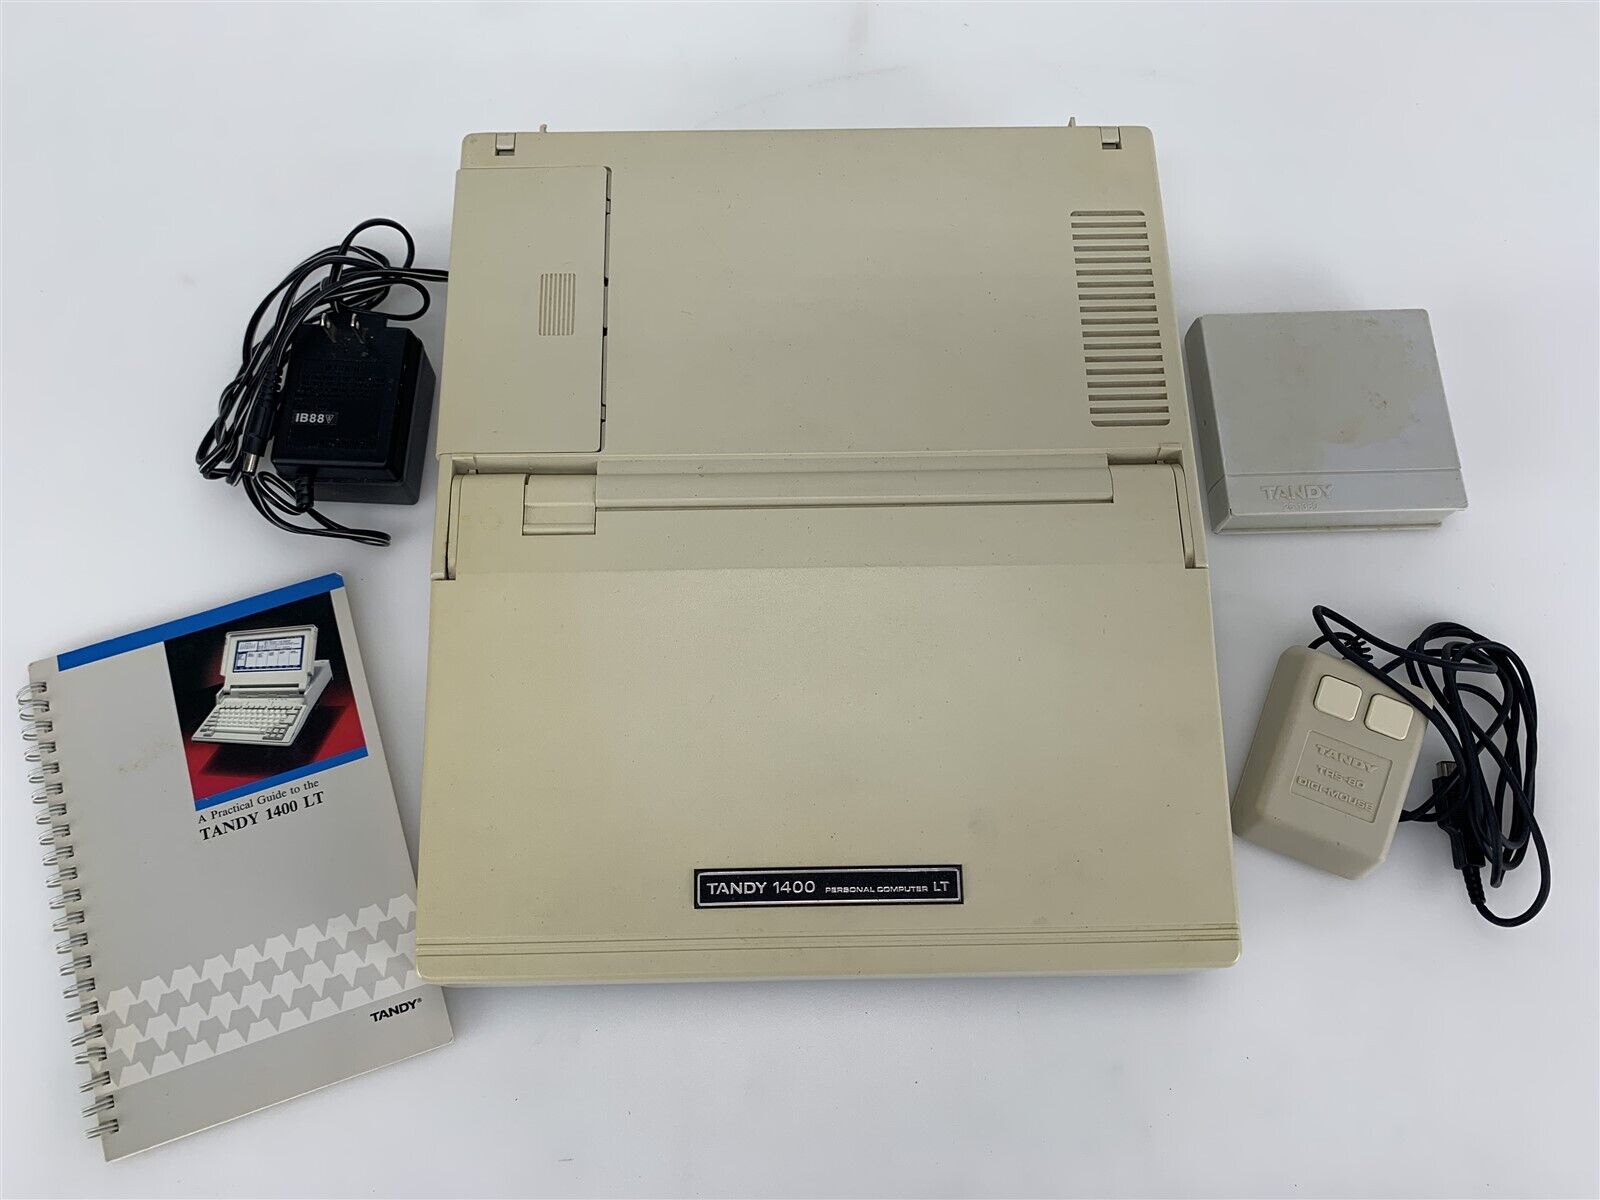 Tandy 1400 LT Personal Computer